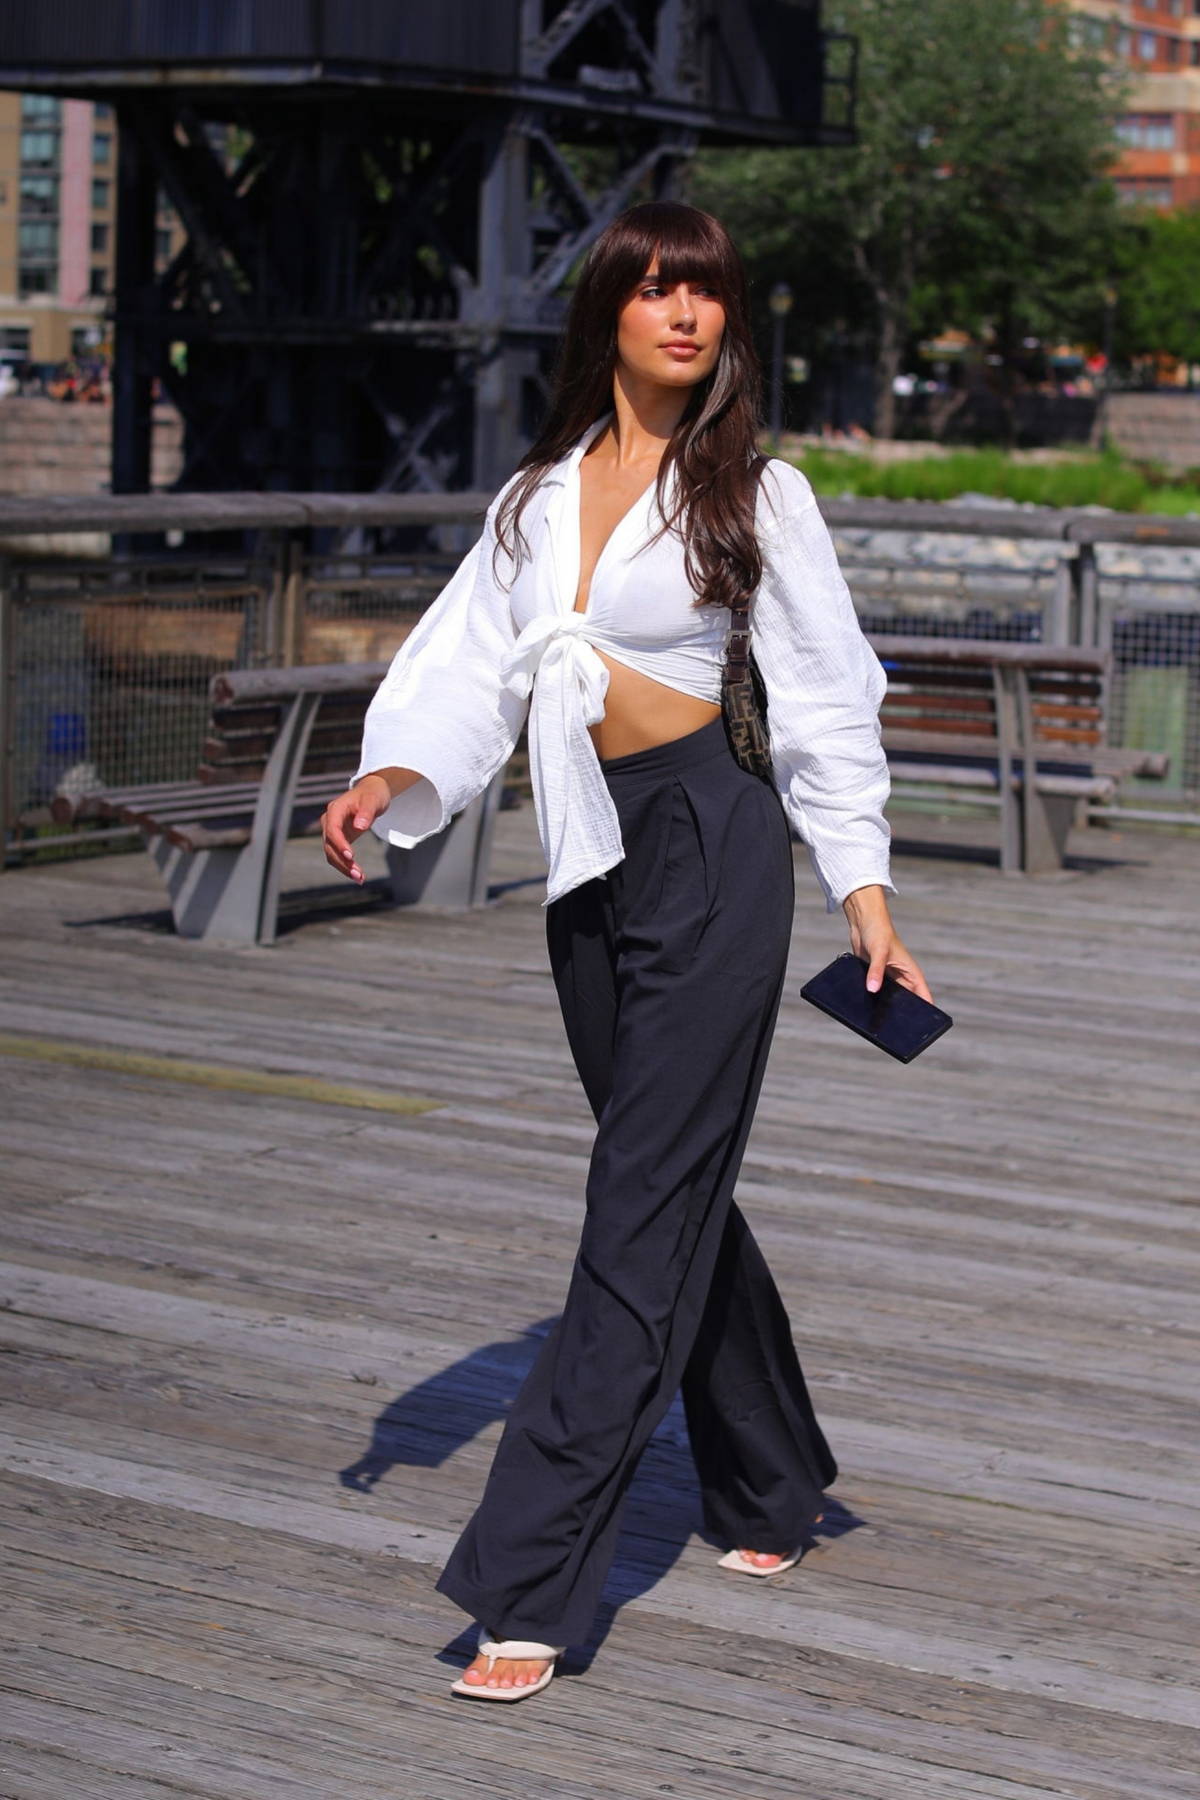 tao wickrath looks trendy in a knotted white blouse and black trousers as  she steps out in new york city-060821_1